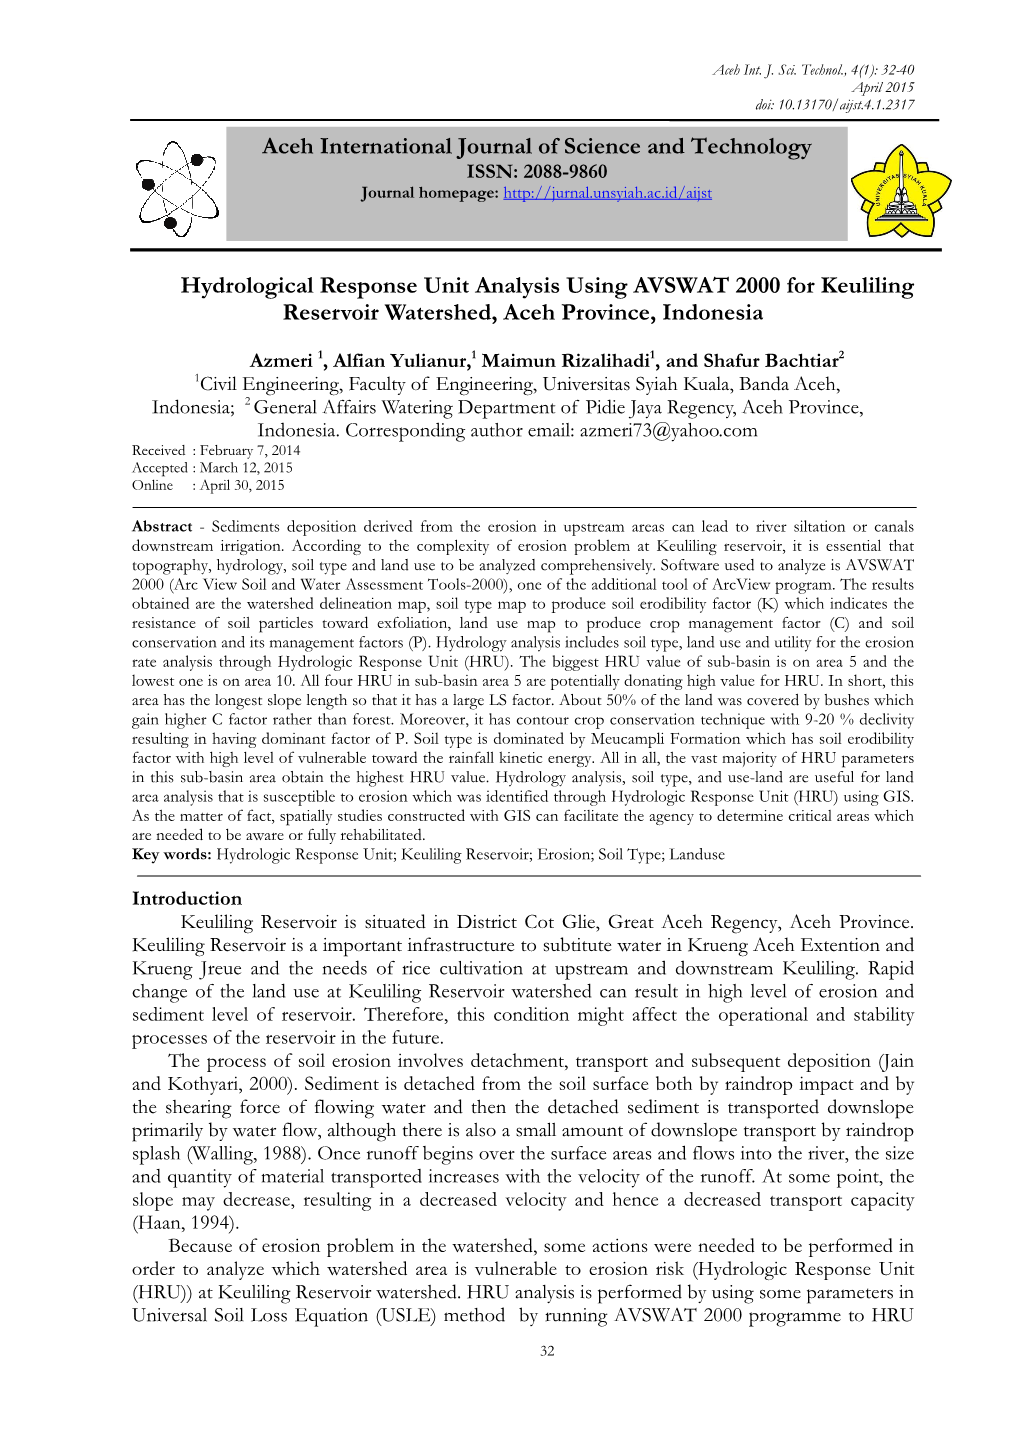 Hydrological Response Unit Analysis Using AVSWAT 2000 for Keuliling Reservoir Watershed, Aceh Province, Indonesia Aceh Internati